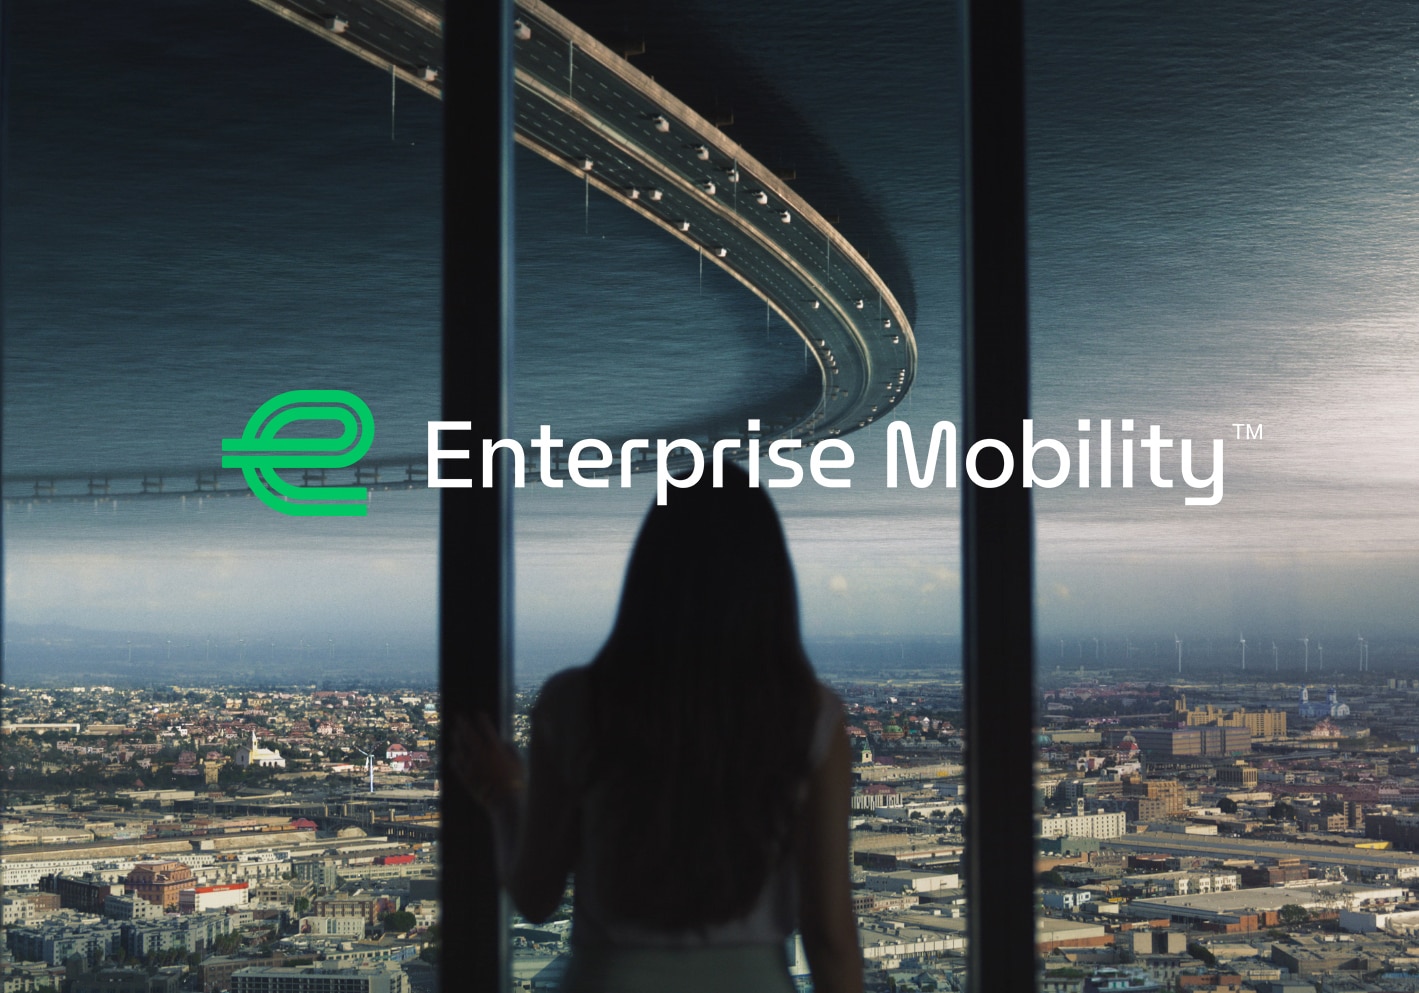 Enterprise Mobility Debuts First Corporate Brand Marketing Campaign 